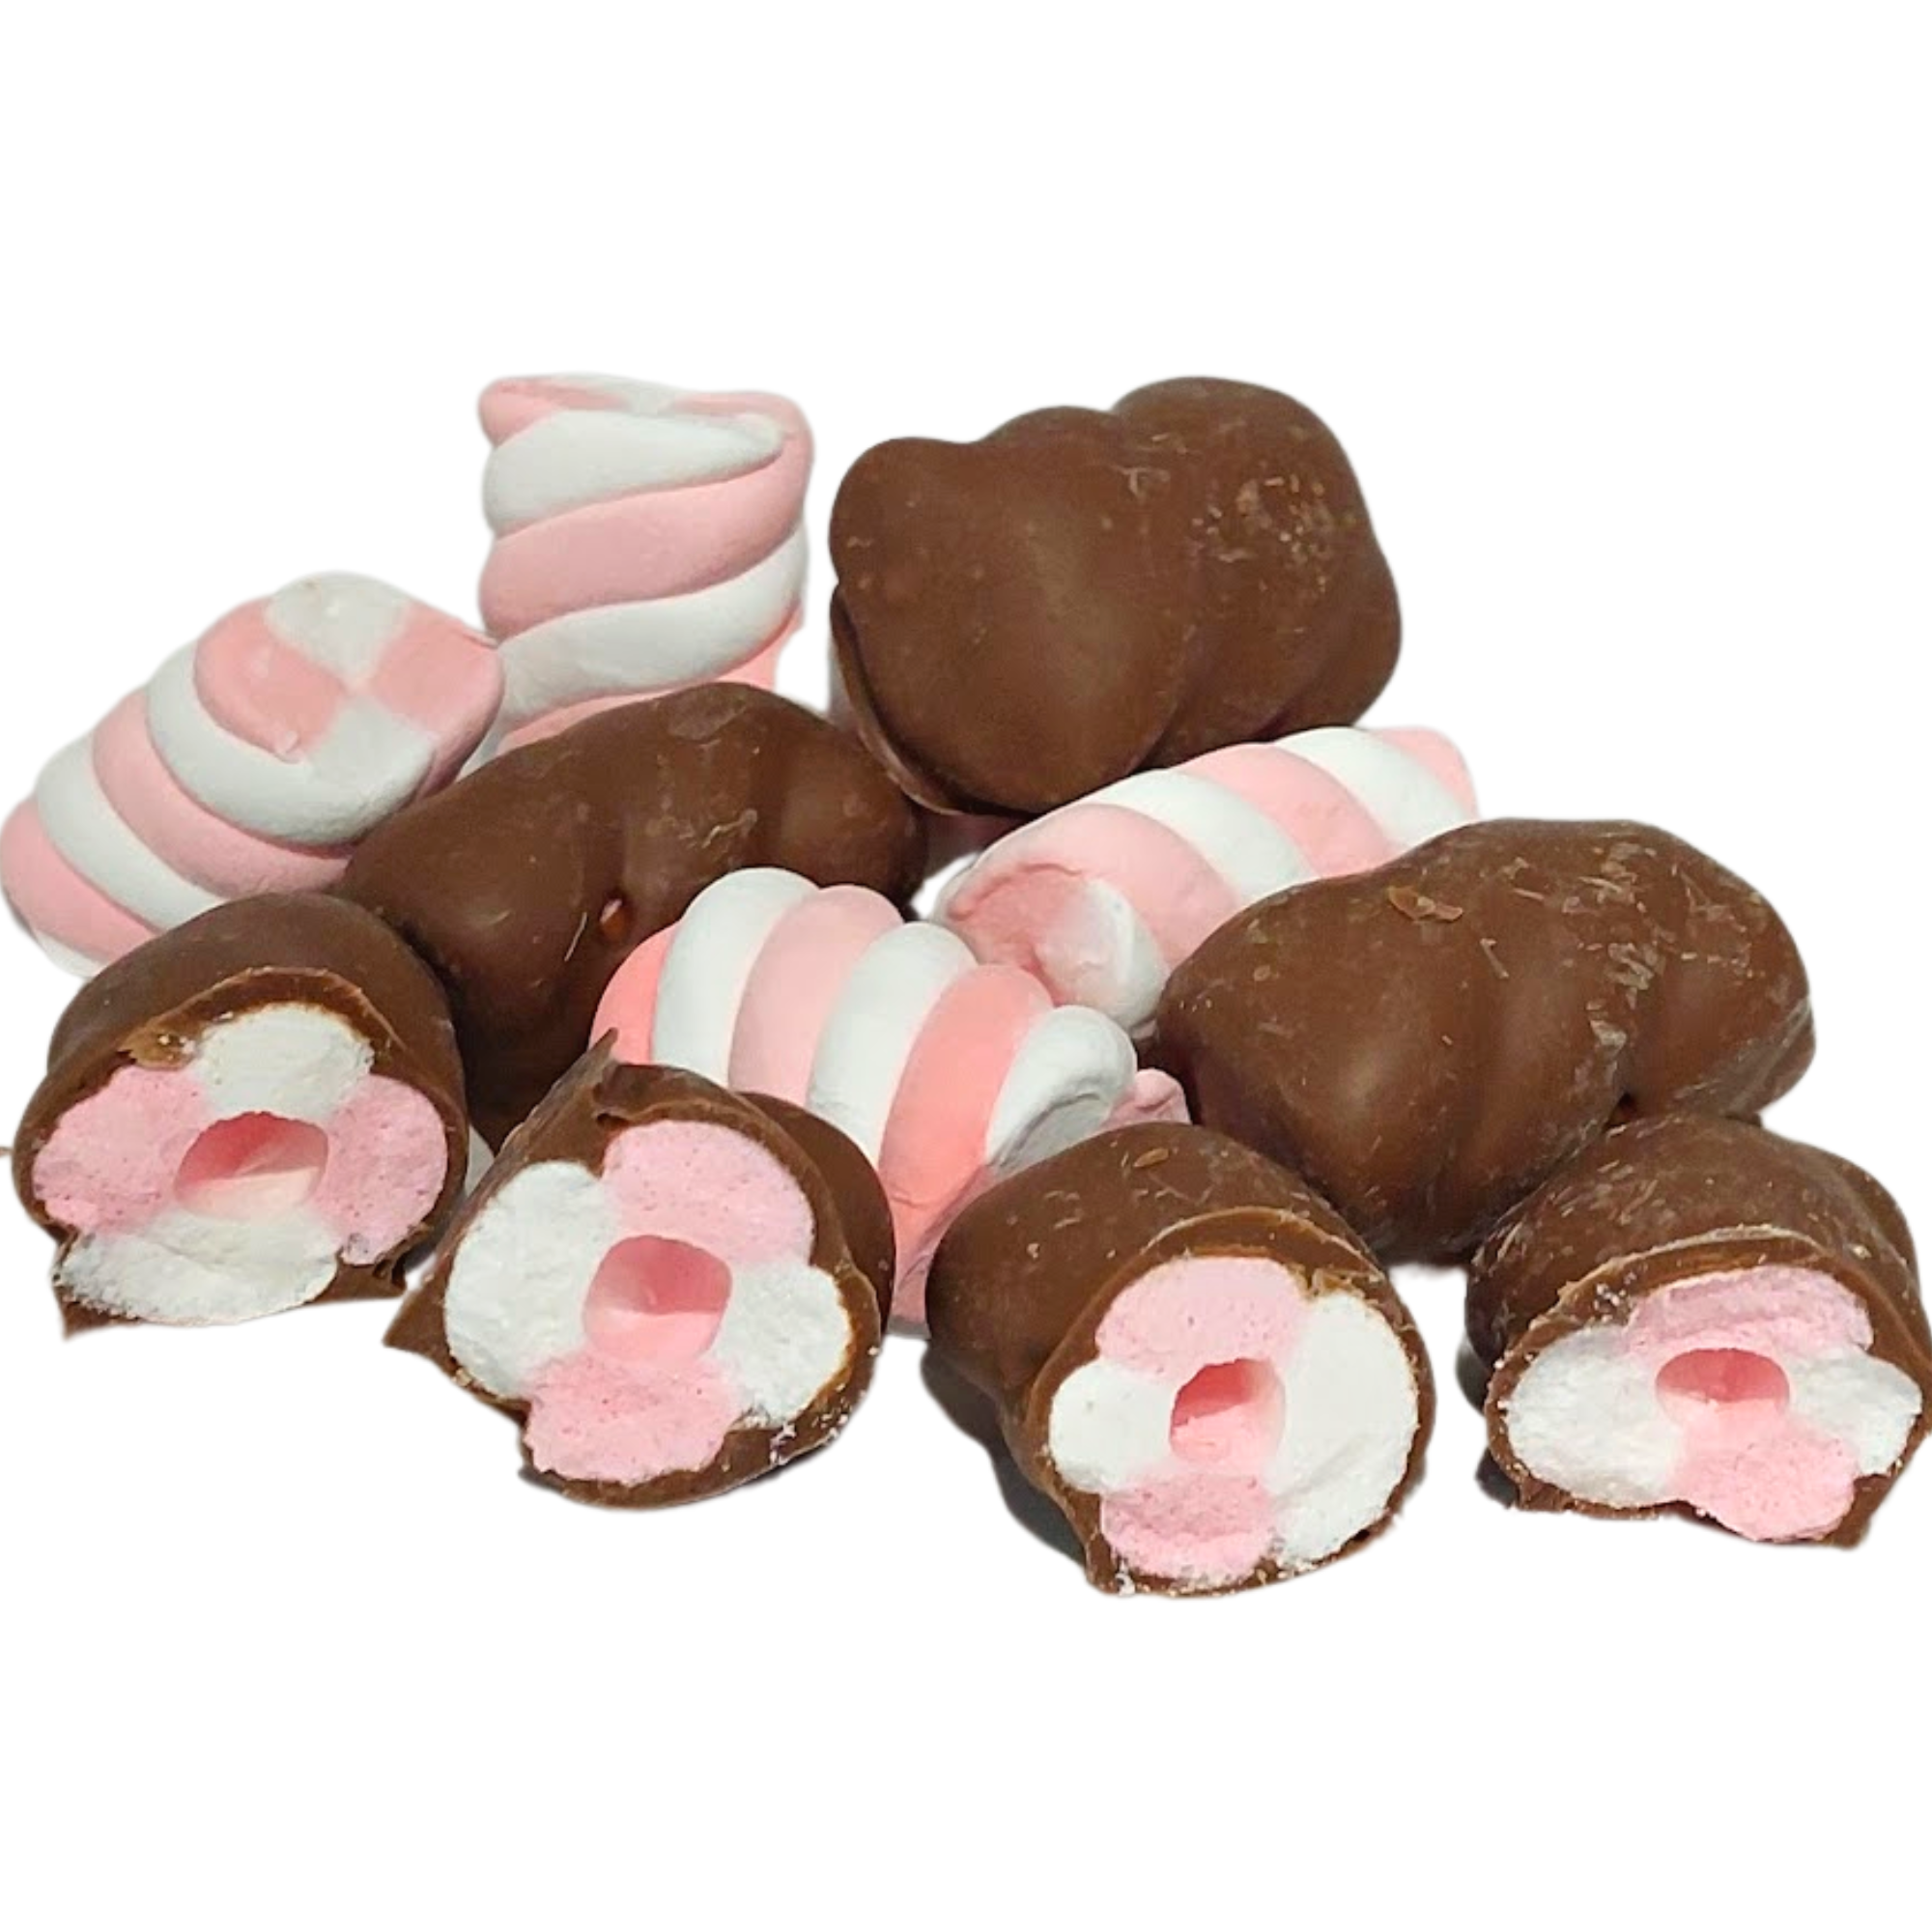 Frochies Twisty Pink Marshmallow chocolate coated freeze dried lollies